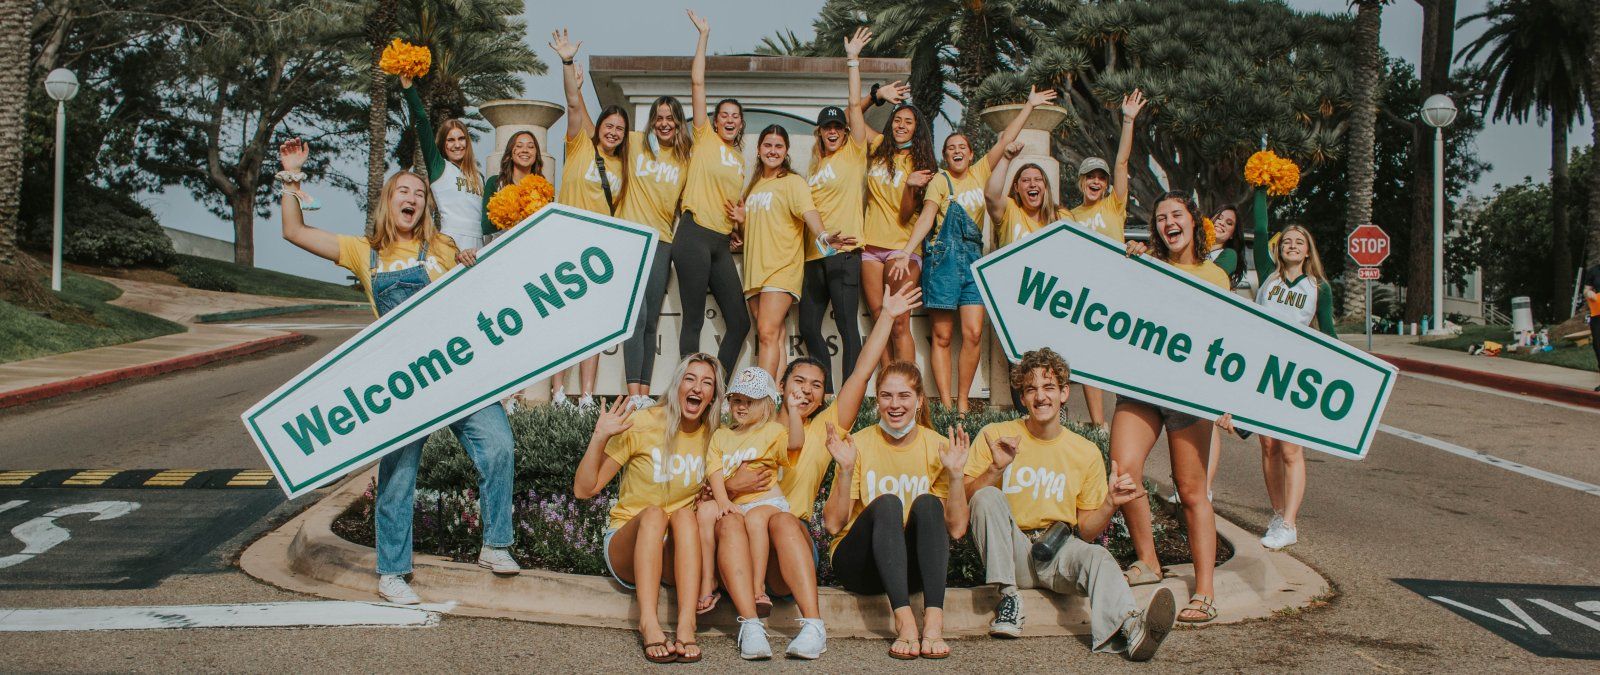 New Student Orientation volunteers excited to greet new students. Holding welcome to NSO sign